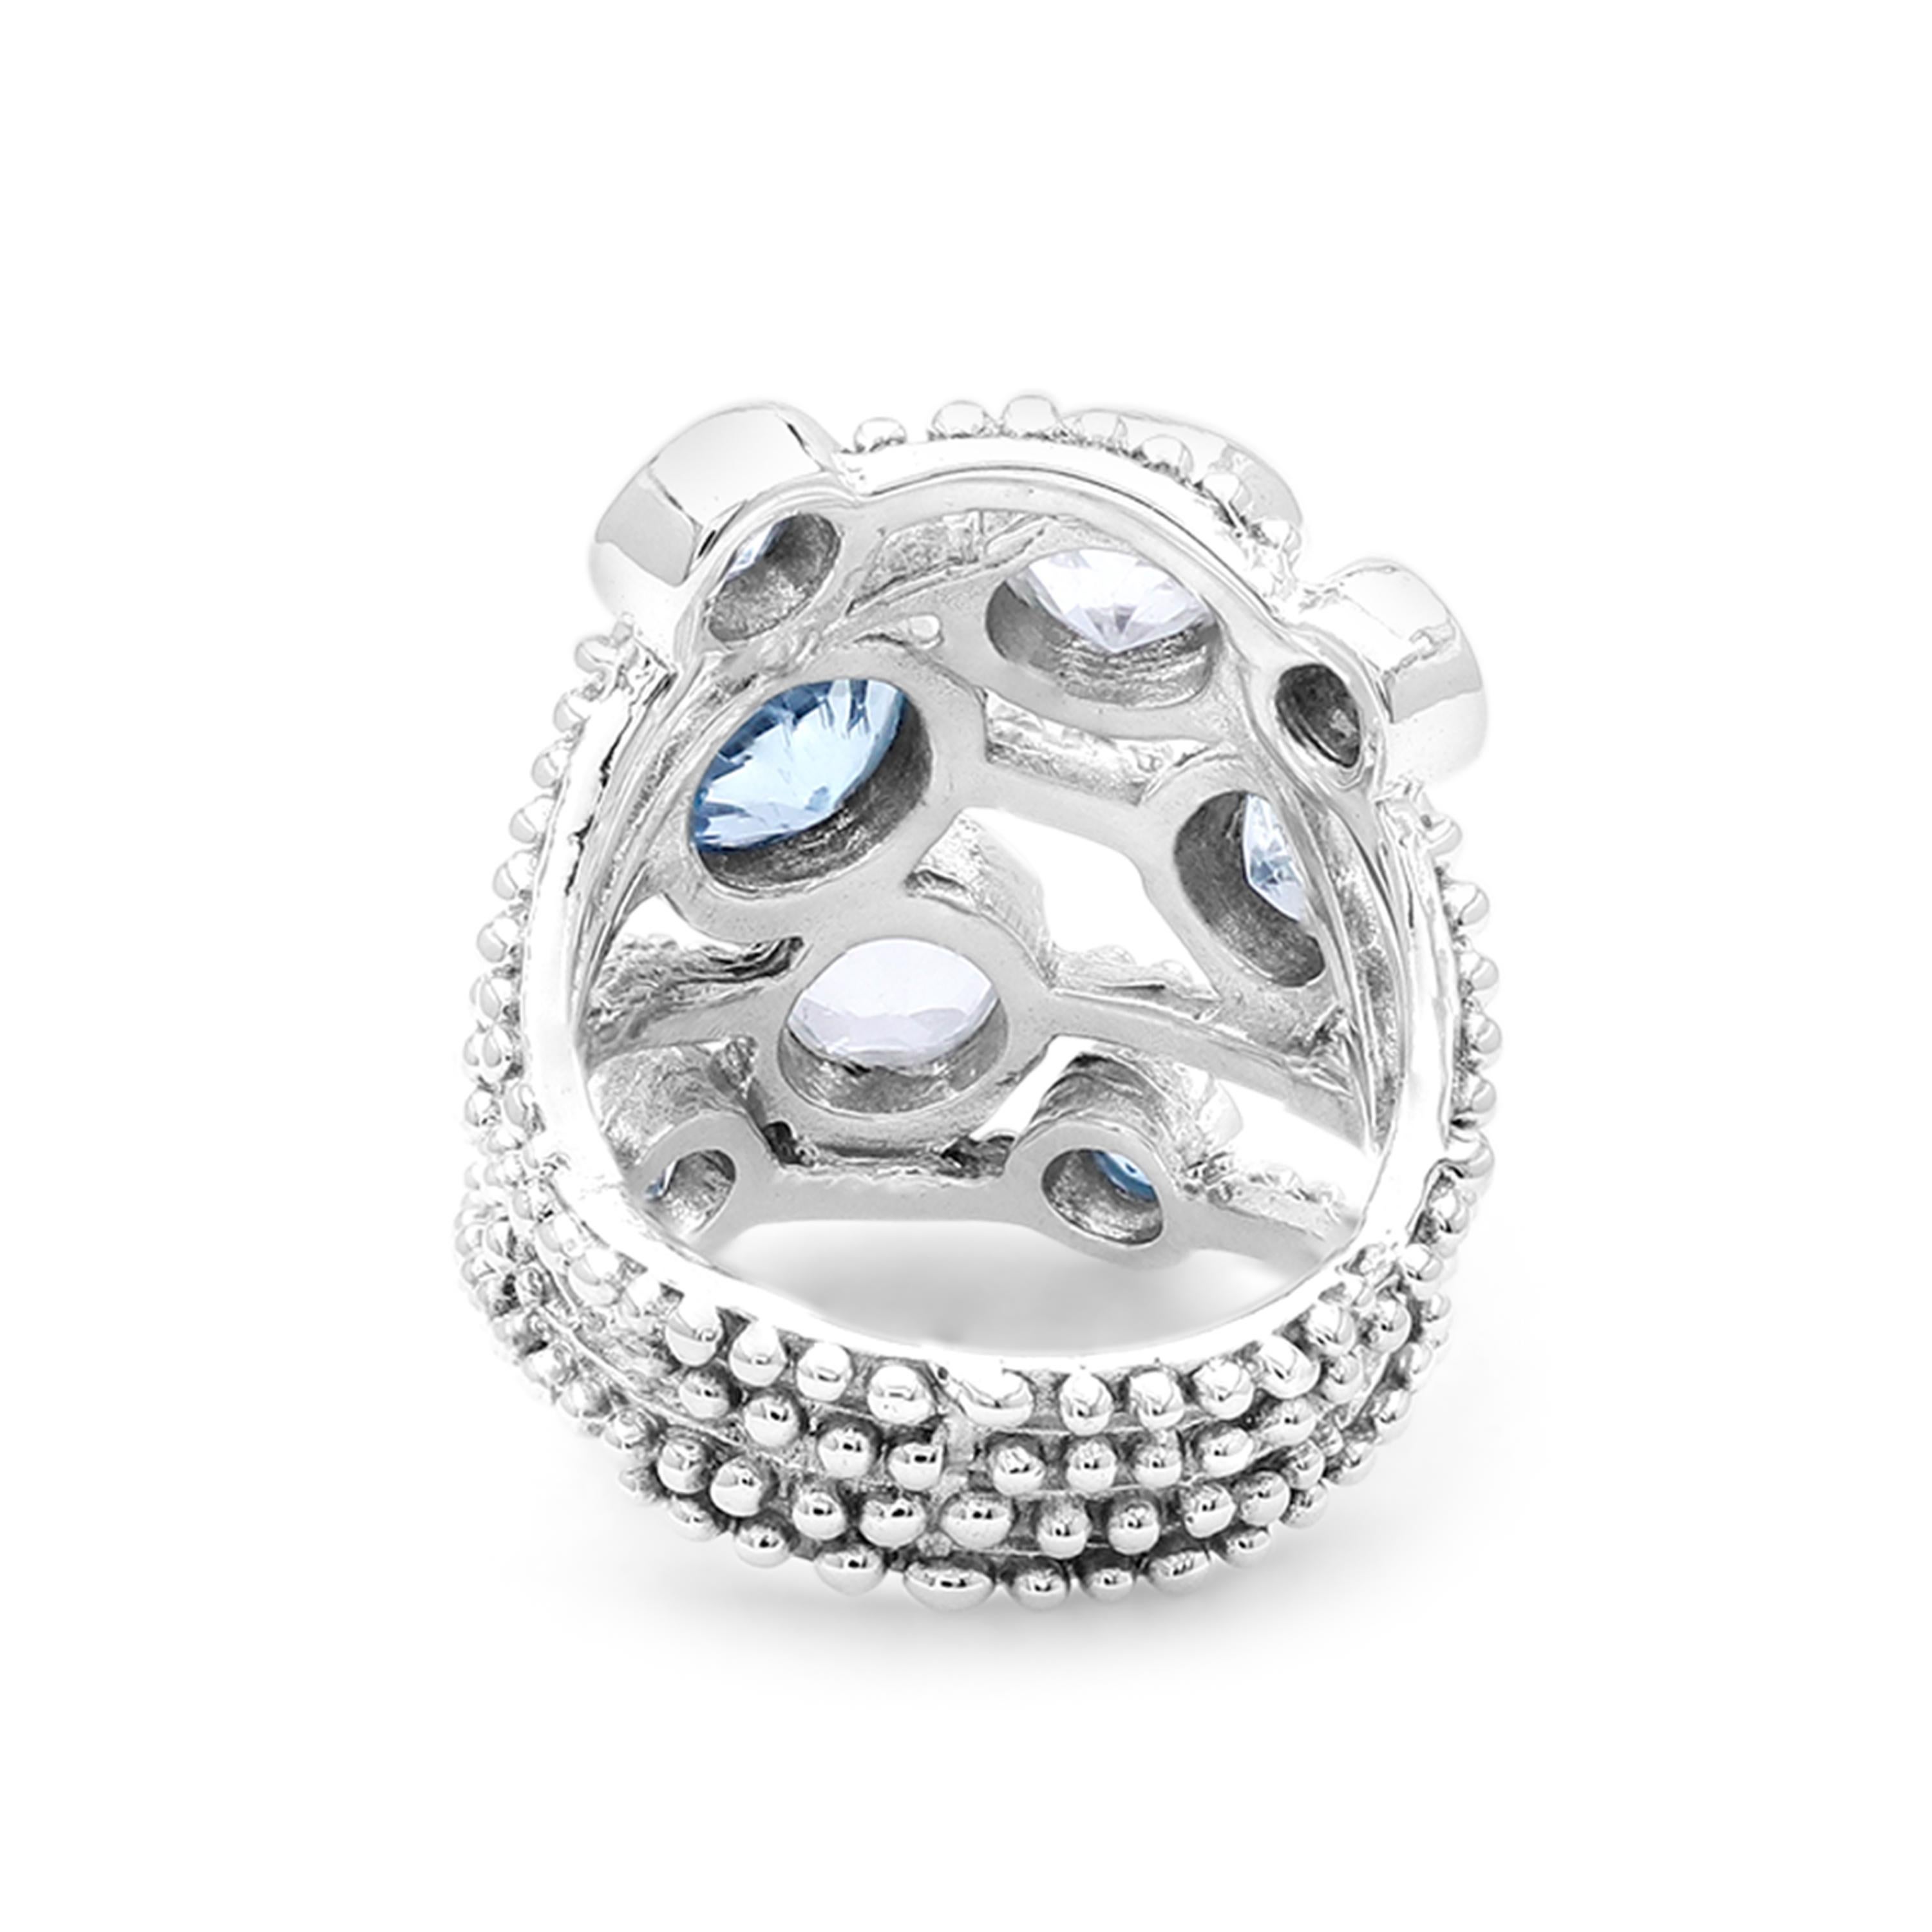 Contemporary Stephen Dweck Sterling Silver, London Blue & White Topaz Ring Sz 7 For Sale